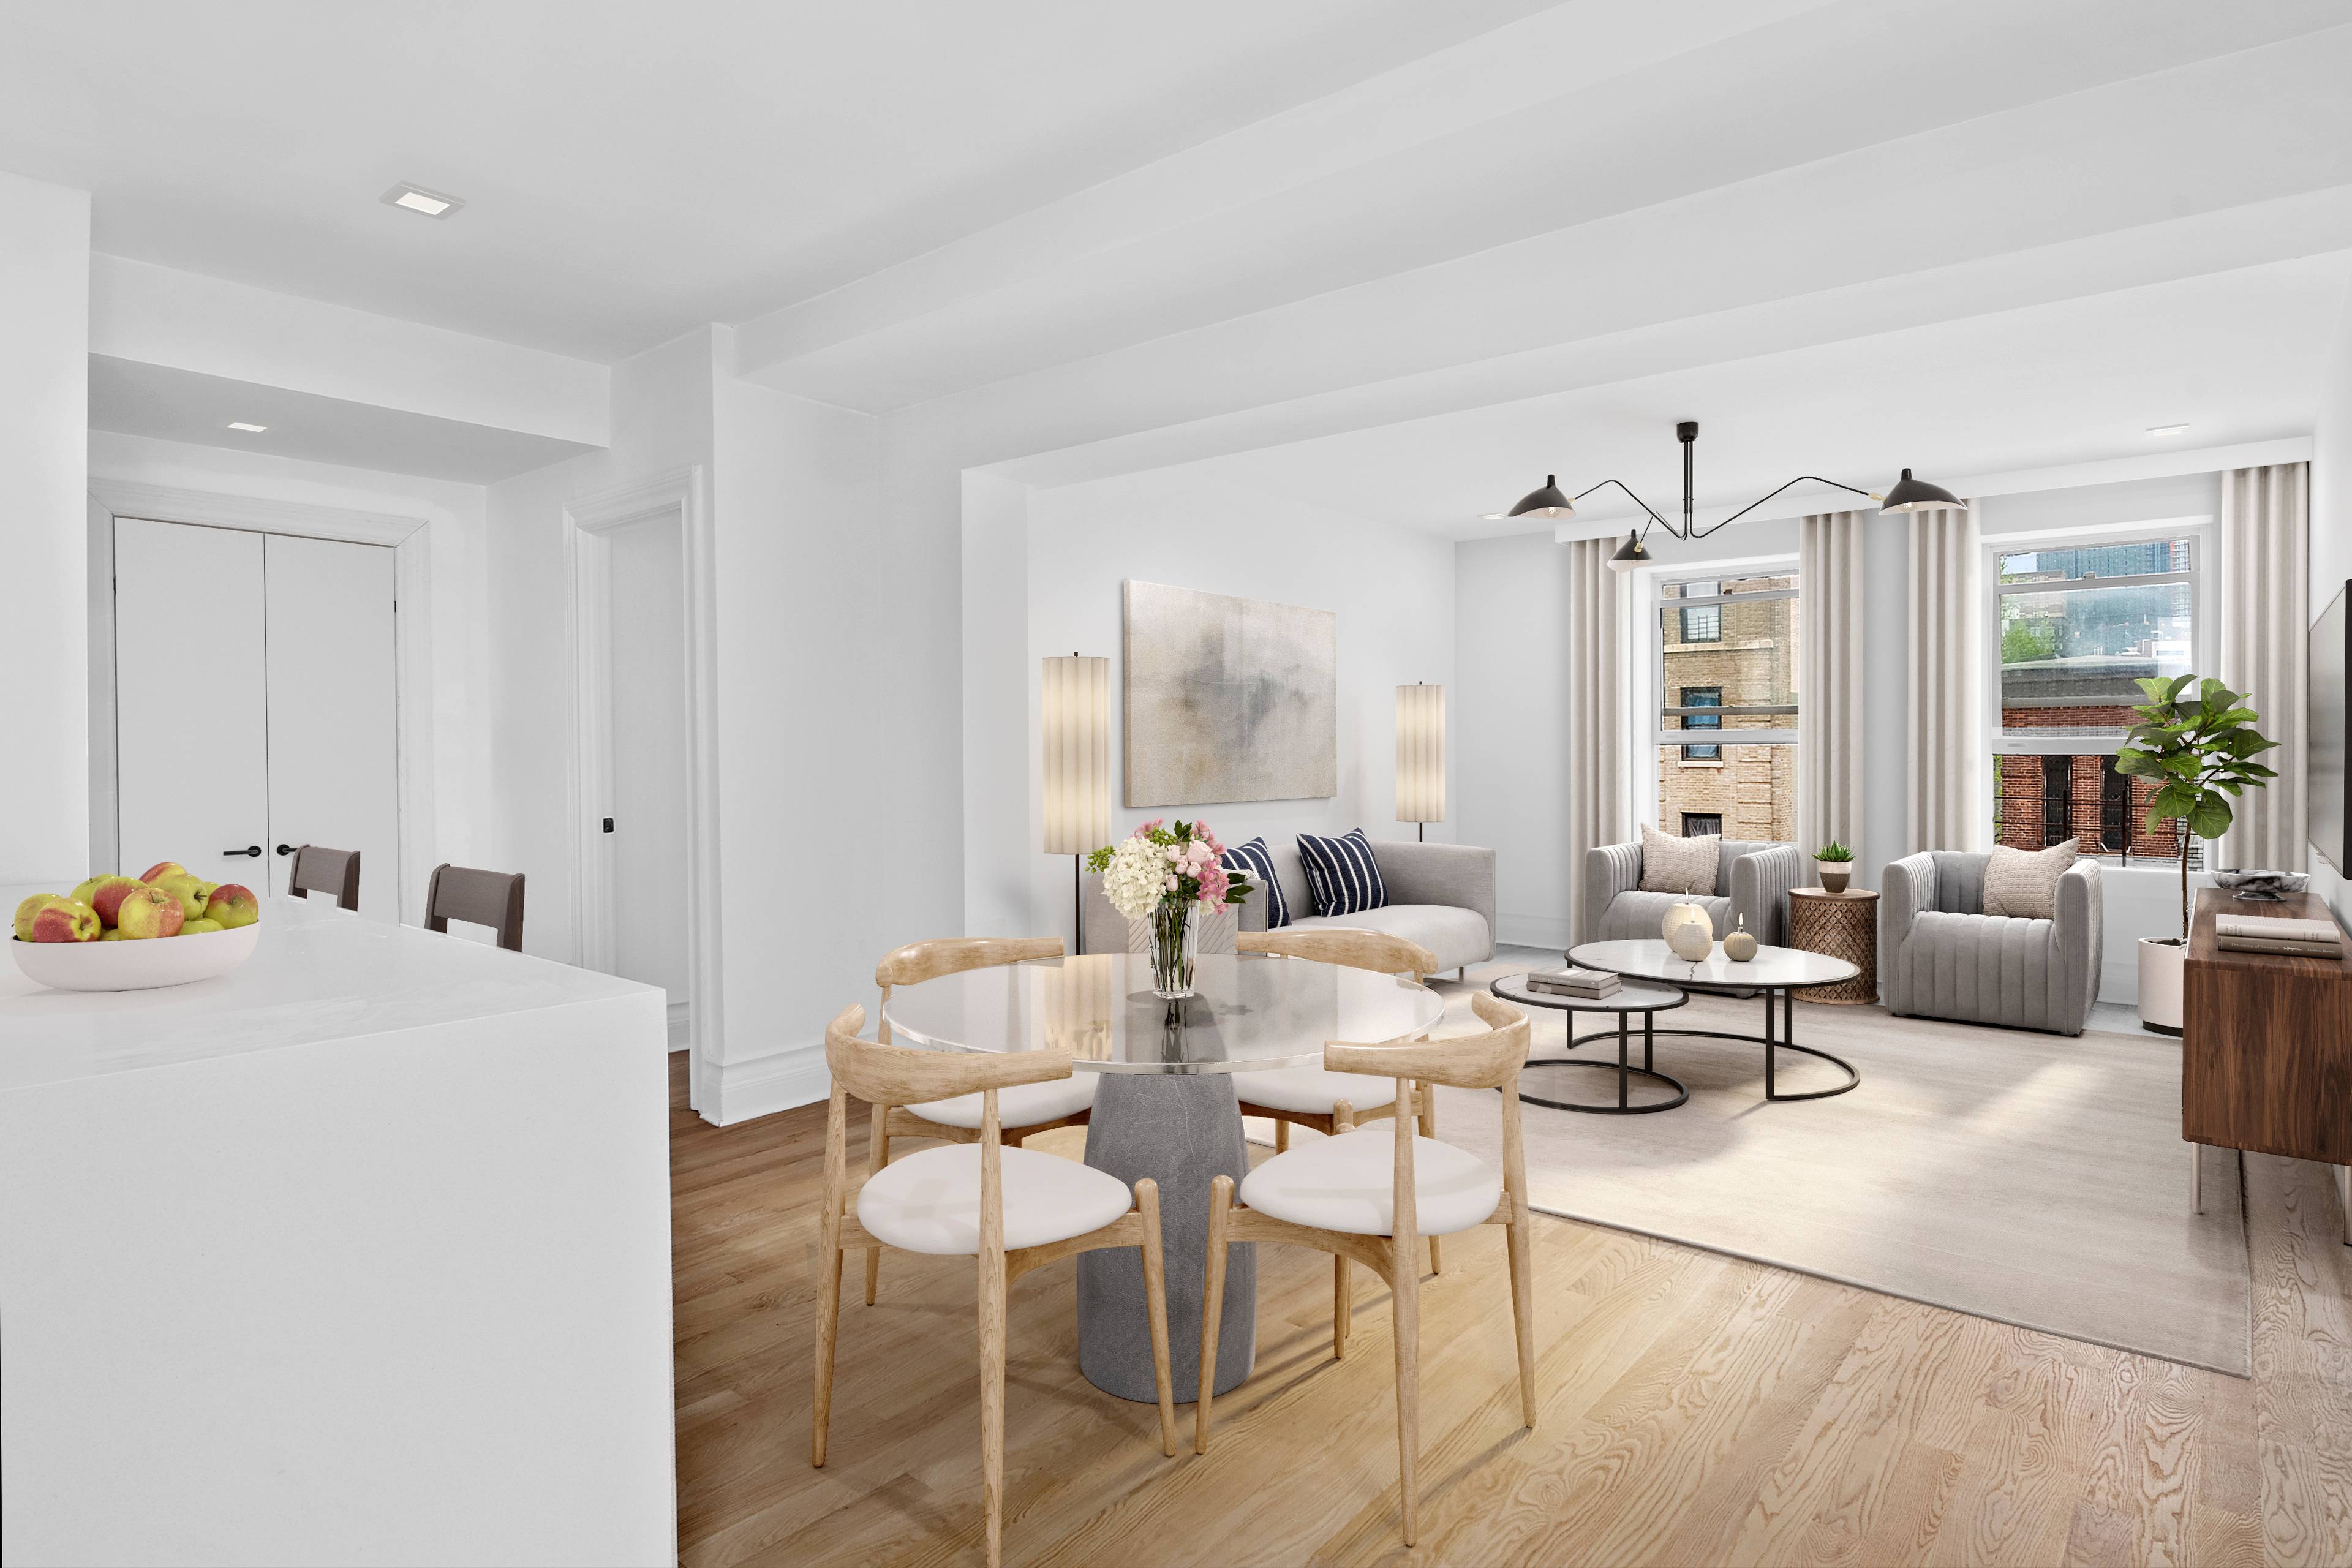 Introducing 475 Washington Avenue, built at the turn of the 20th century in the historic Clinton Hill neighborhood, this newly renovated pre war condominium transports you back in time with ...